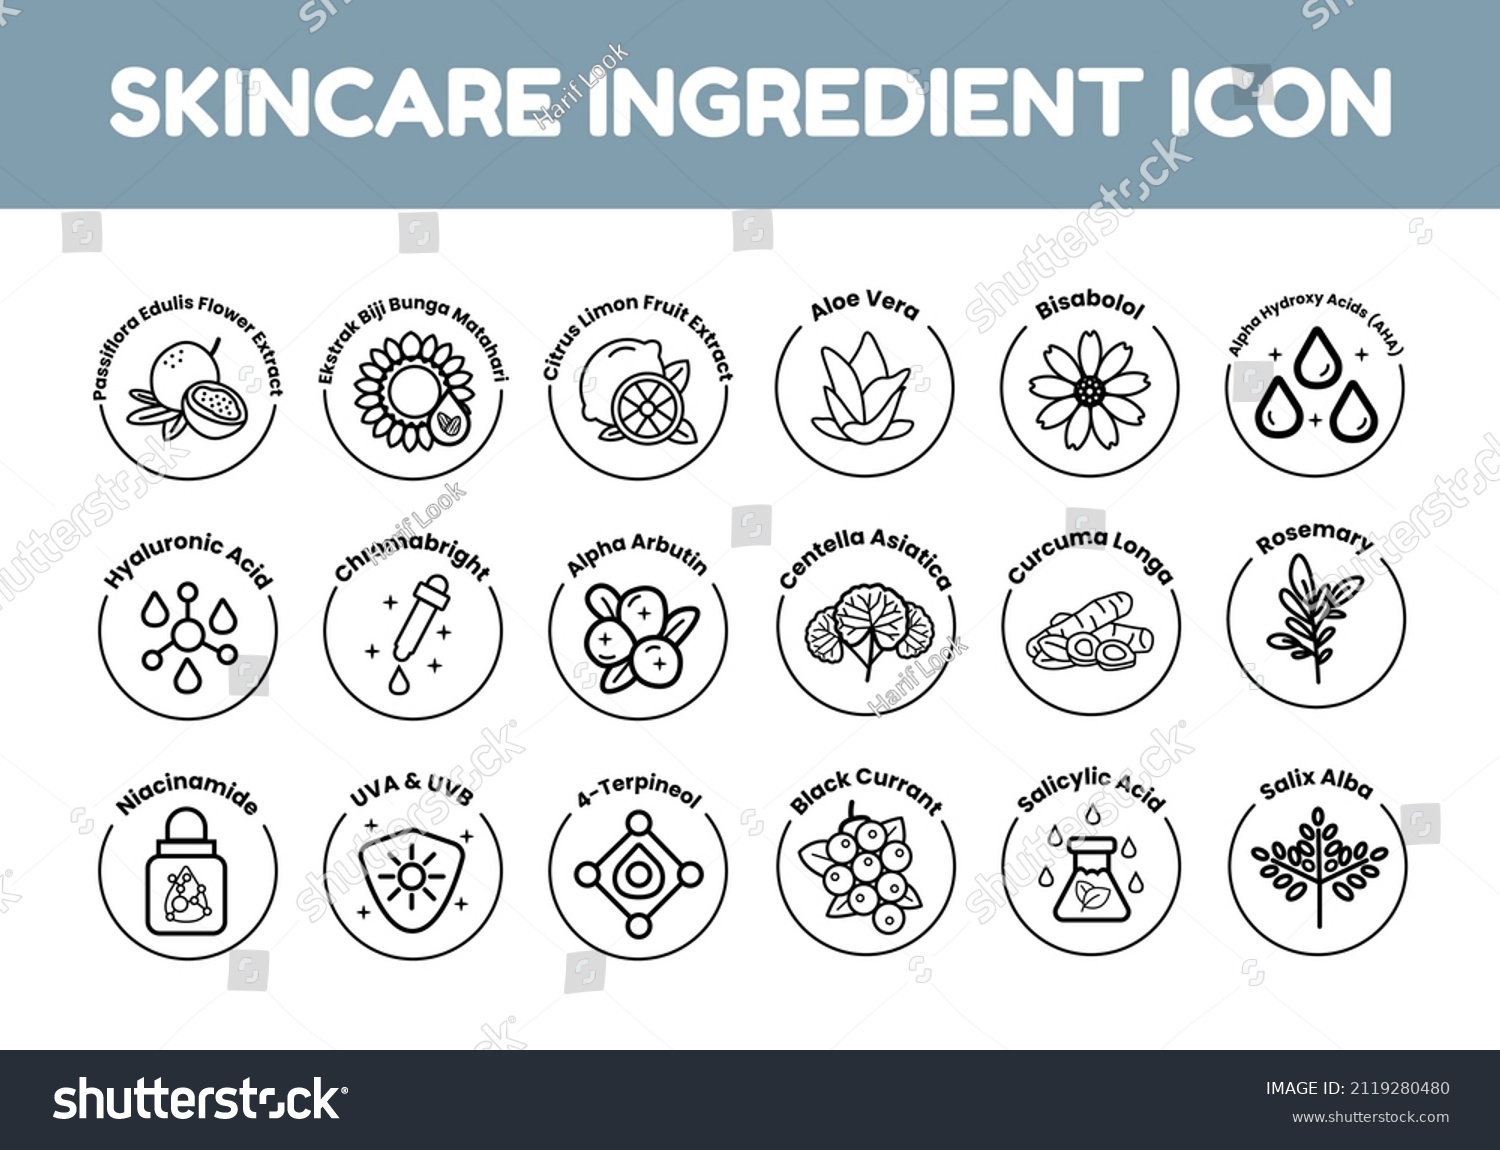 SVG of Vector set of design elements, icons, and badges for natural and organic cosmetics skincare ingredients in trendy linear style. Centella Asiatica, Curcuma Longa, Hyaluronic Acid, Chromabright, etc. svg